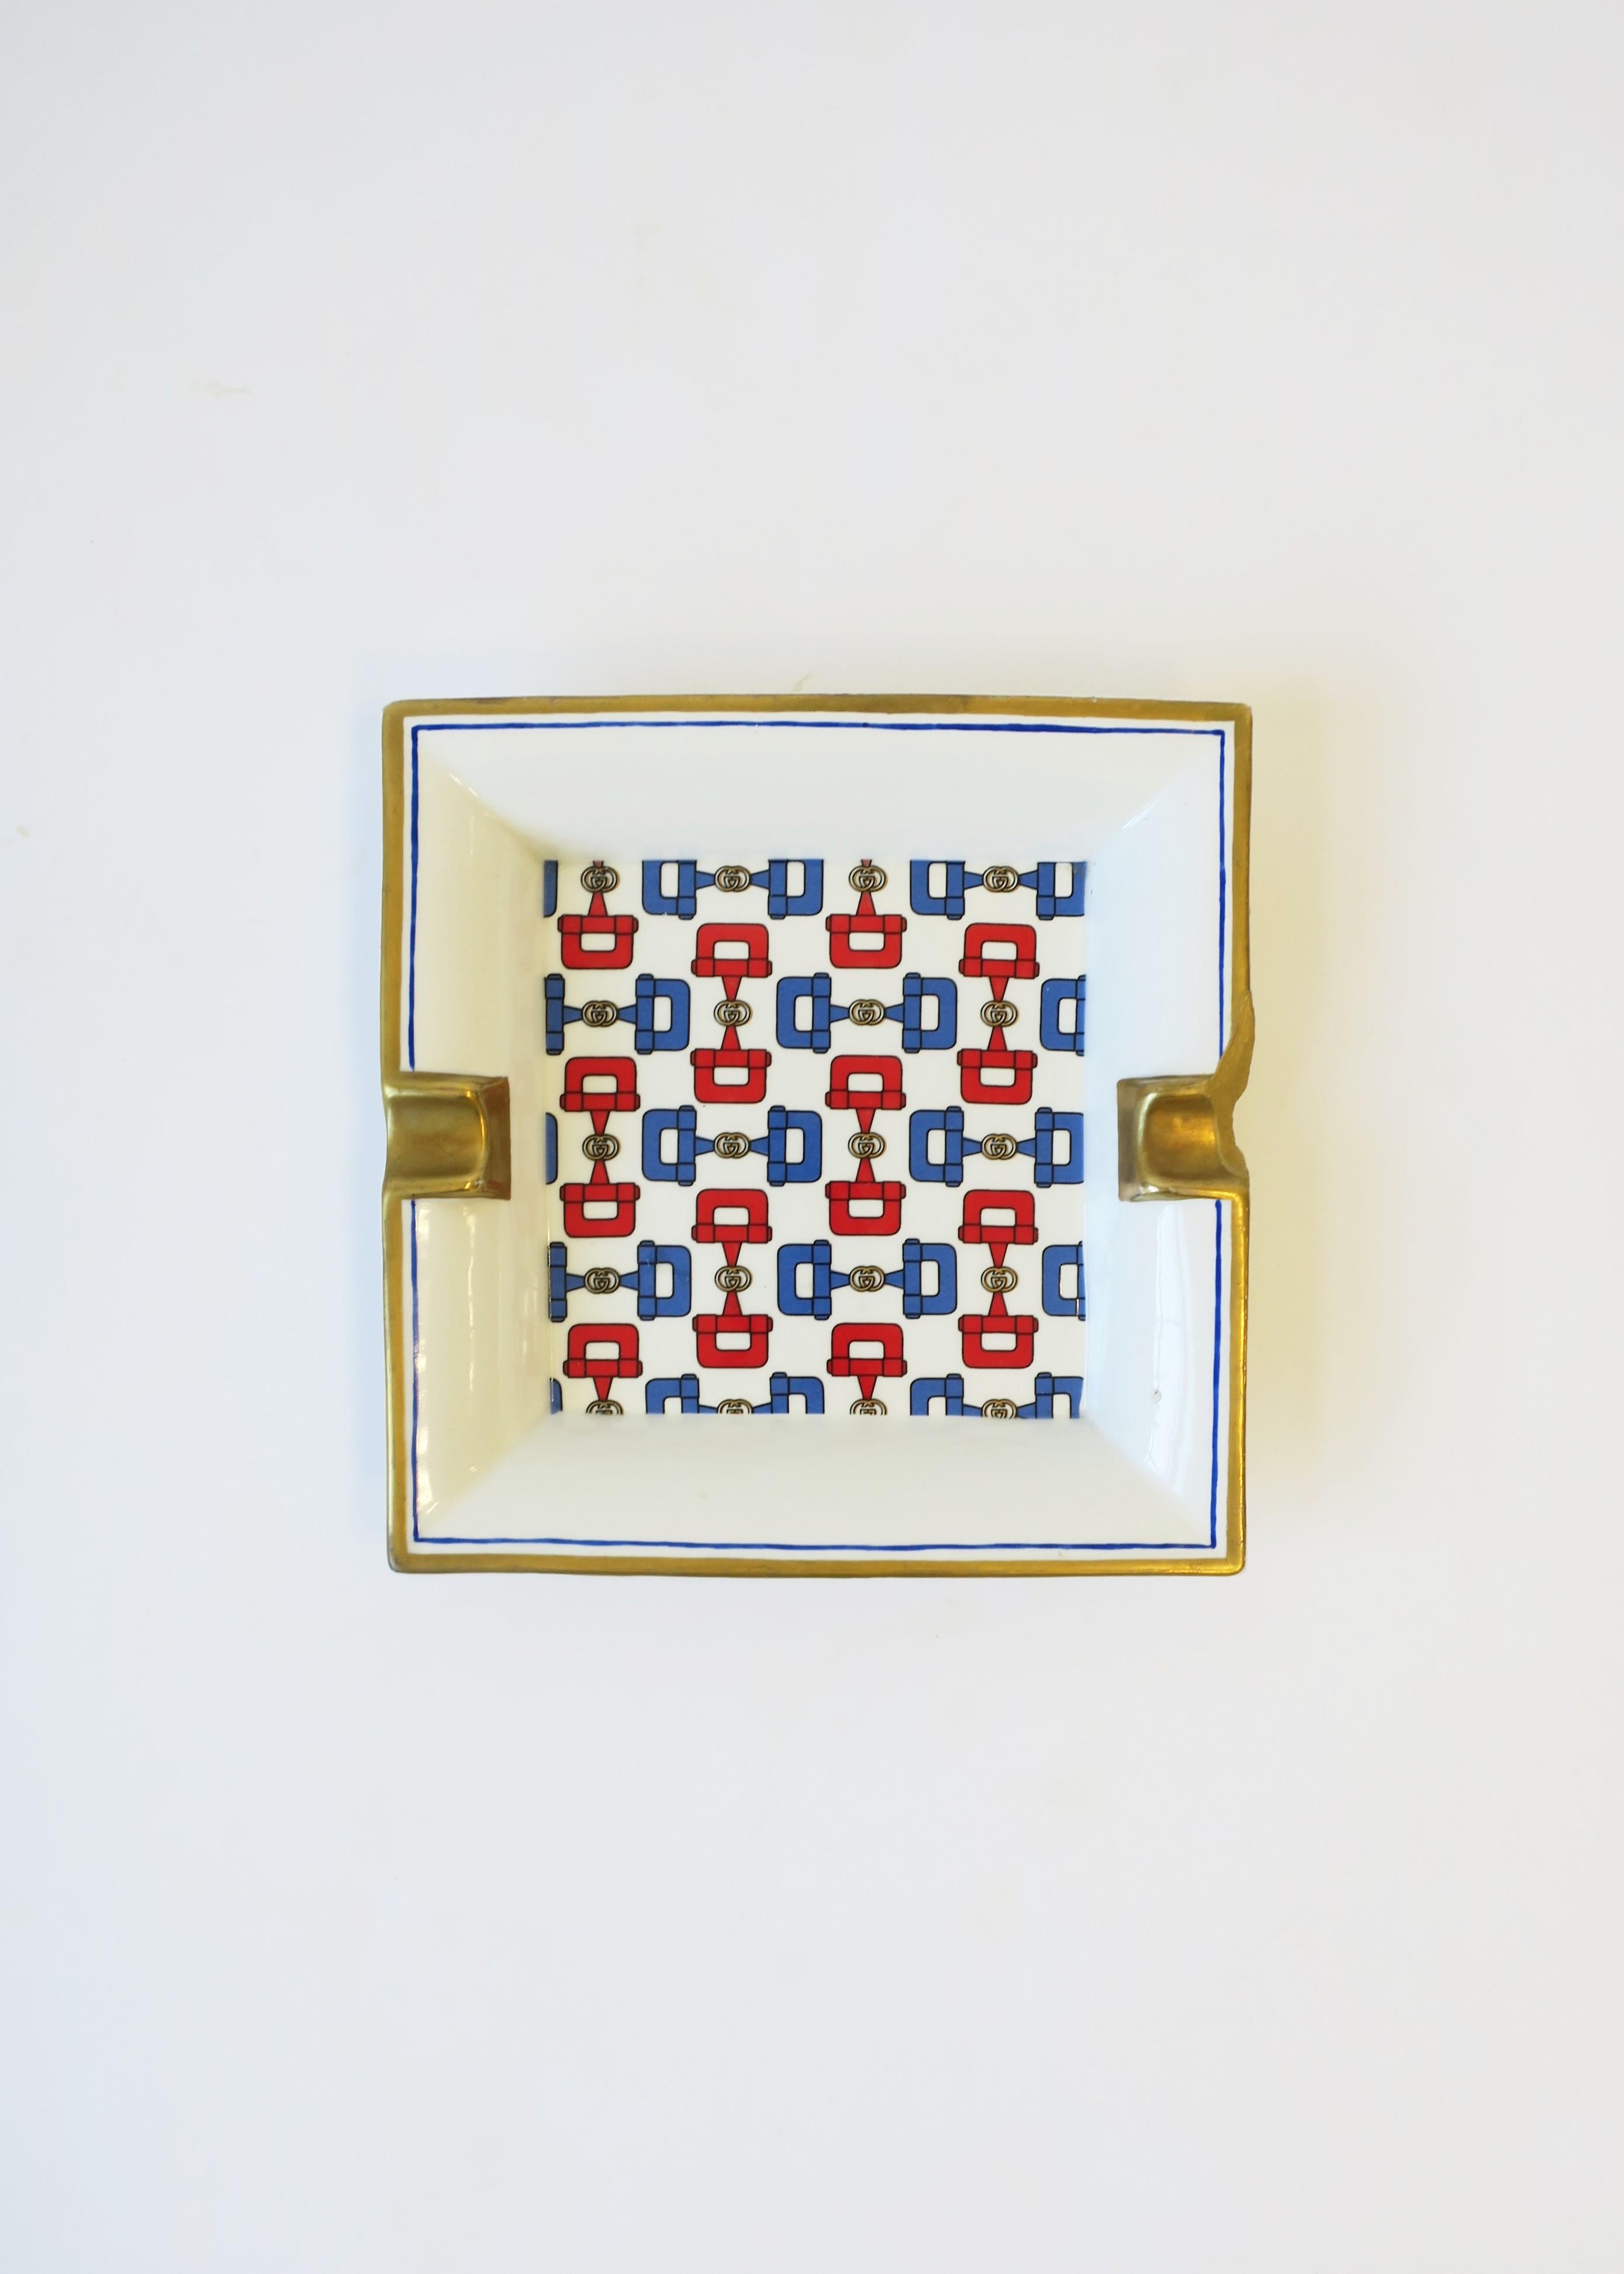 A vintage porcelain Gucci ashtray or vide-poche catchall, circa late-20th century, Italy. This ashtray vide-poche catchall from luxury design house Gucci is white porcelain with iconic double 'GG' and blue and red horse bit design, finished with a